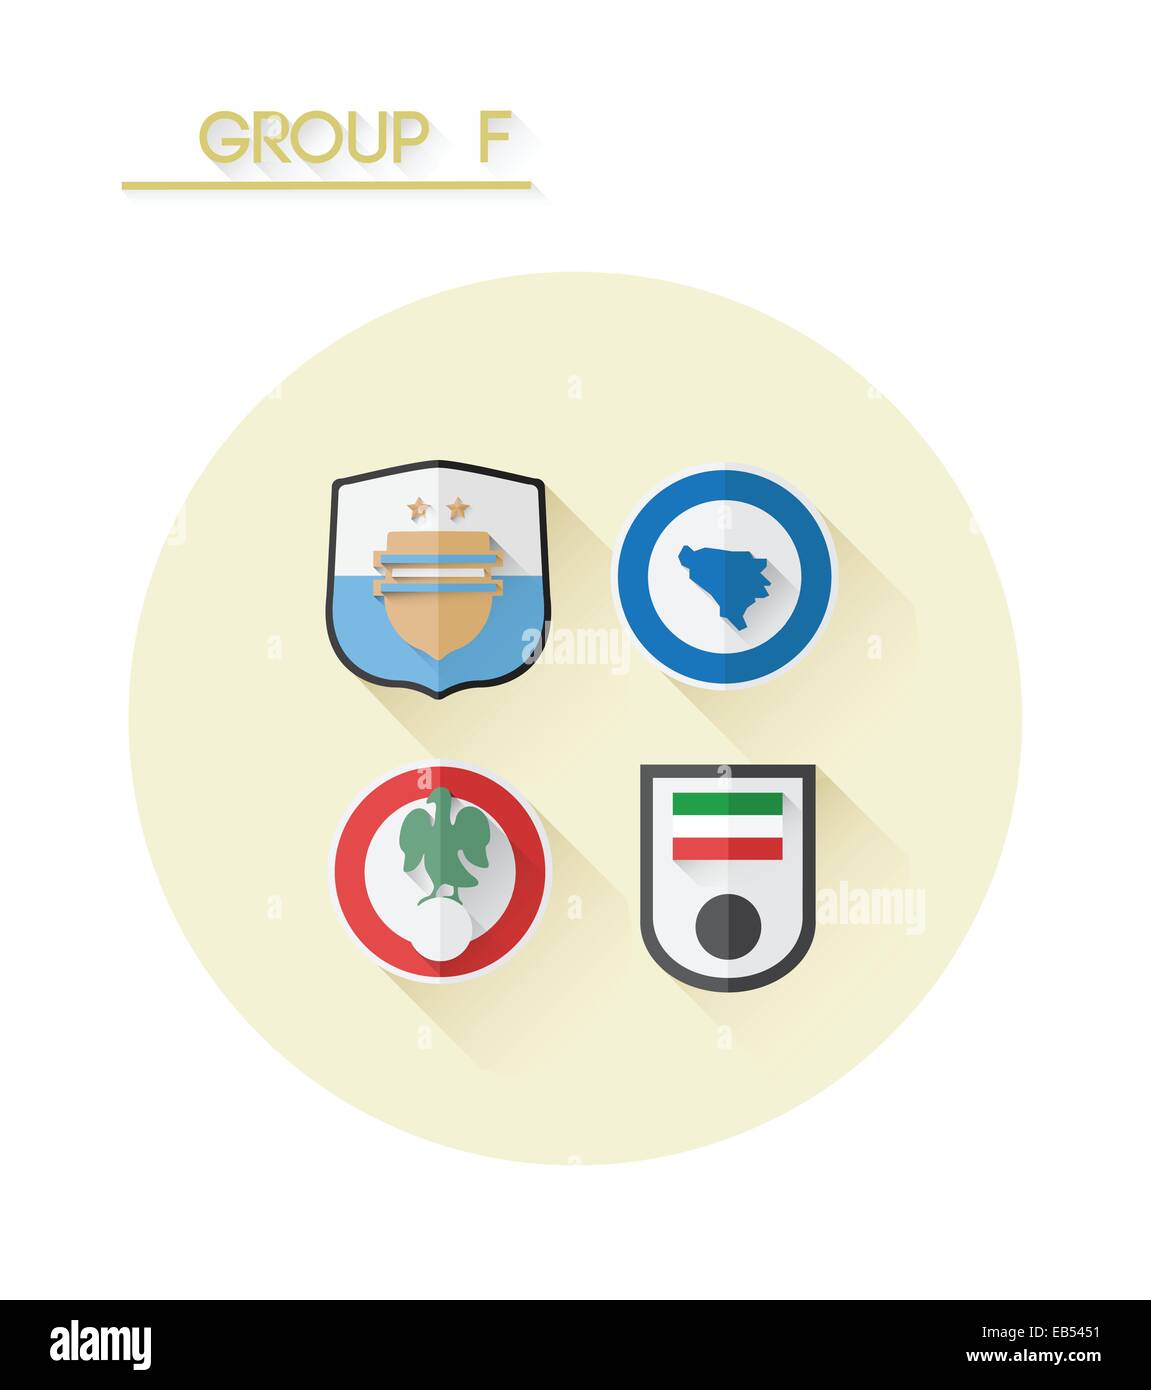 Group f with country crests Stock Vector